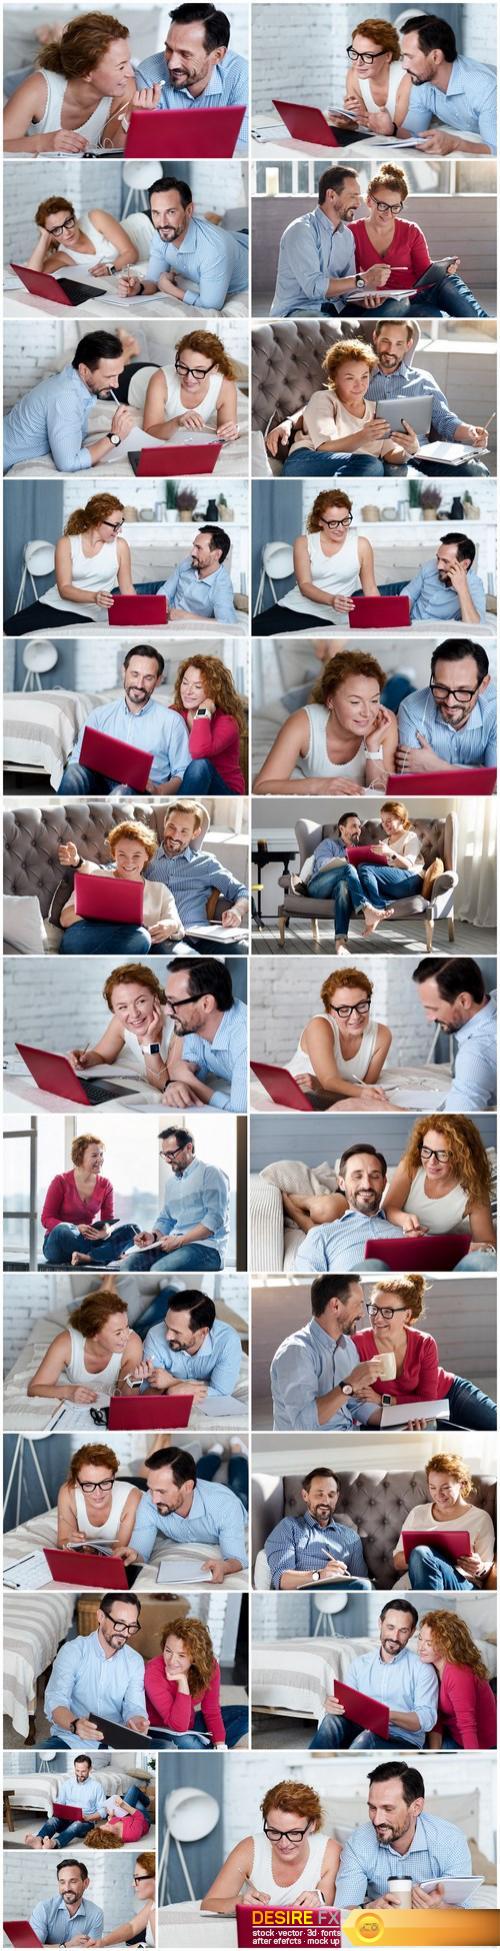 Woman and Man - Working with Laptop & Taking Notes 2 - 25xUHQ JPEG Photo Stock